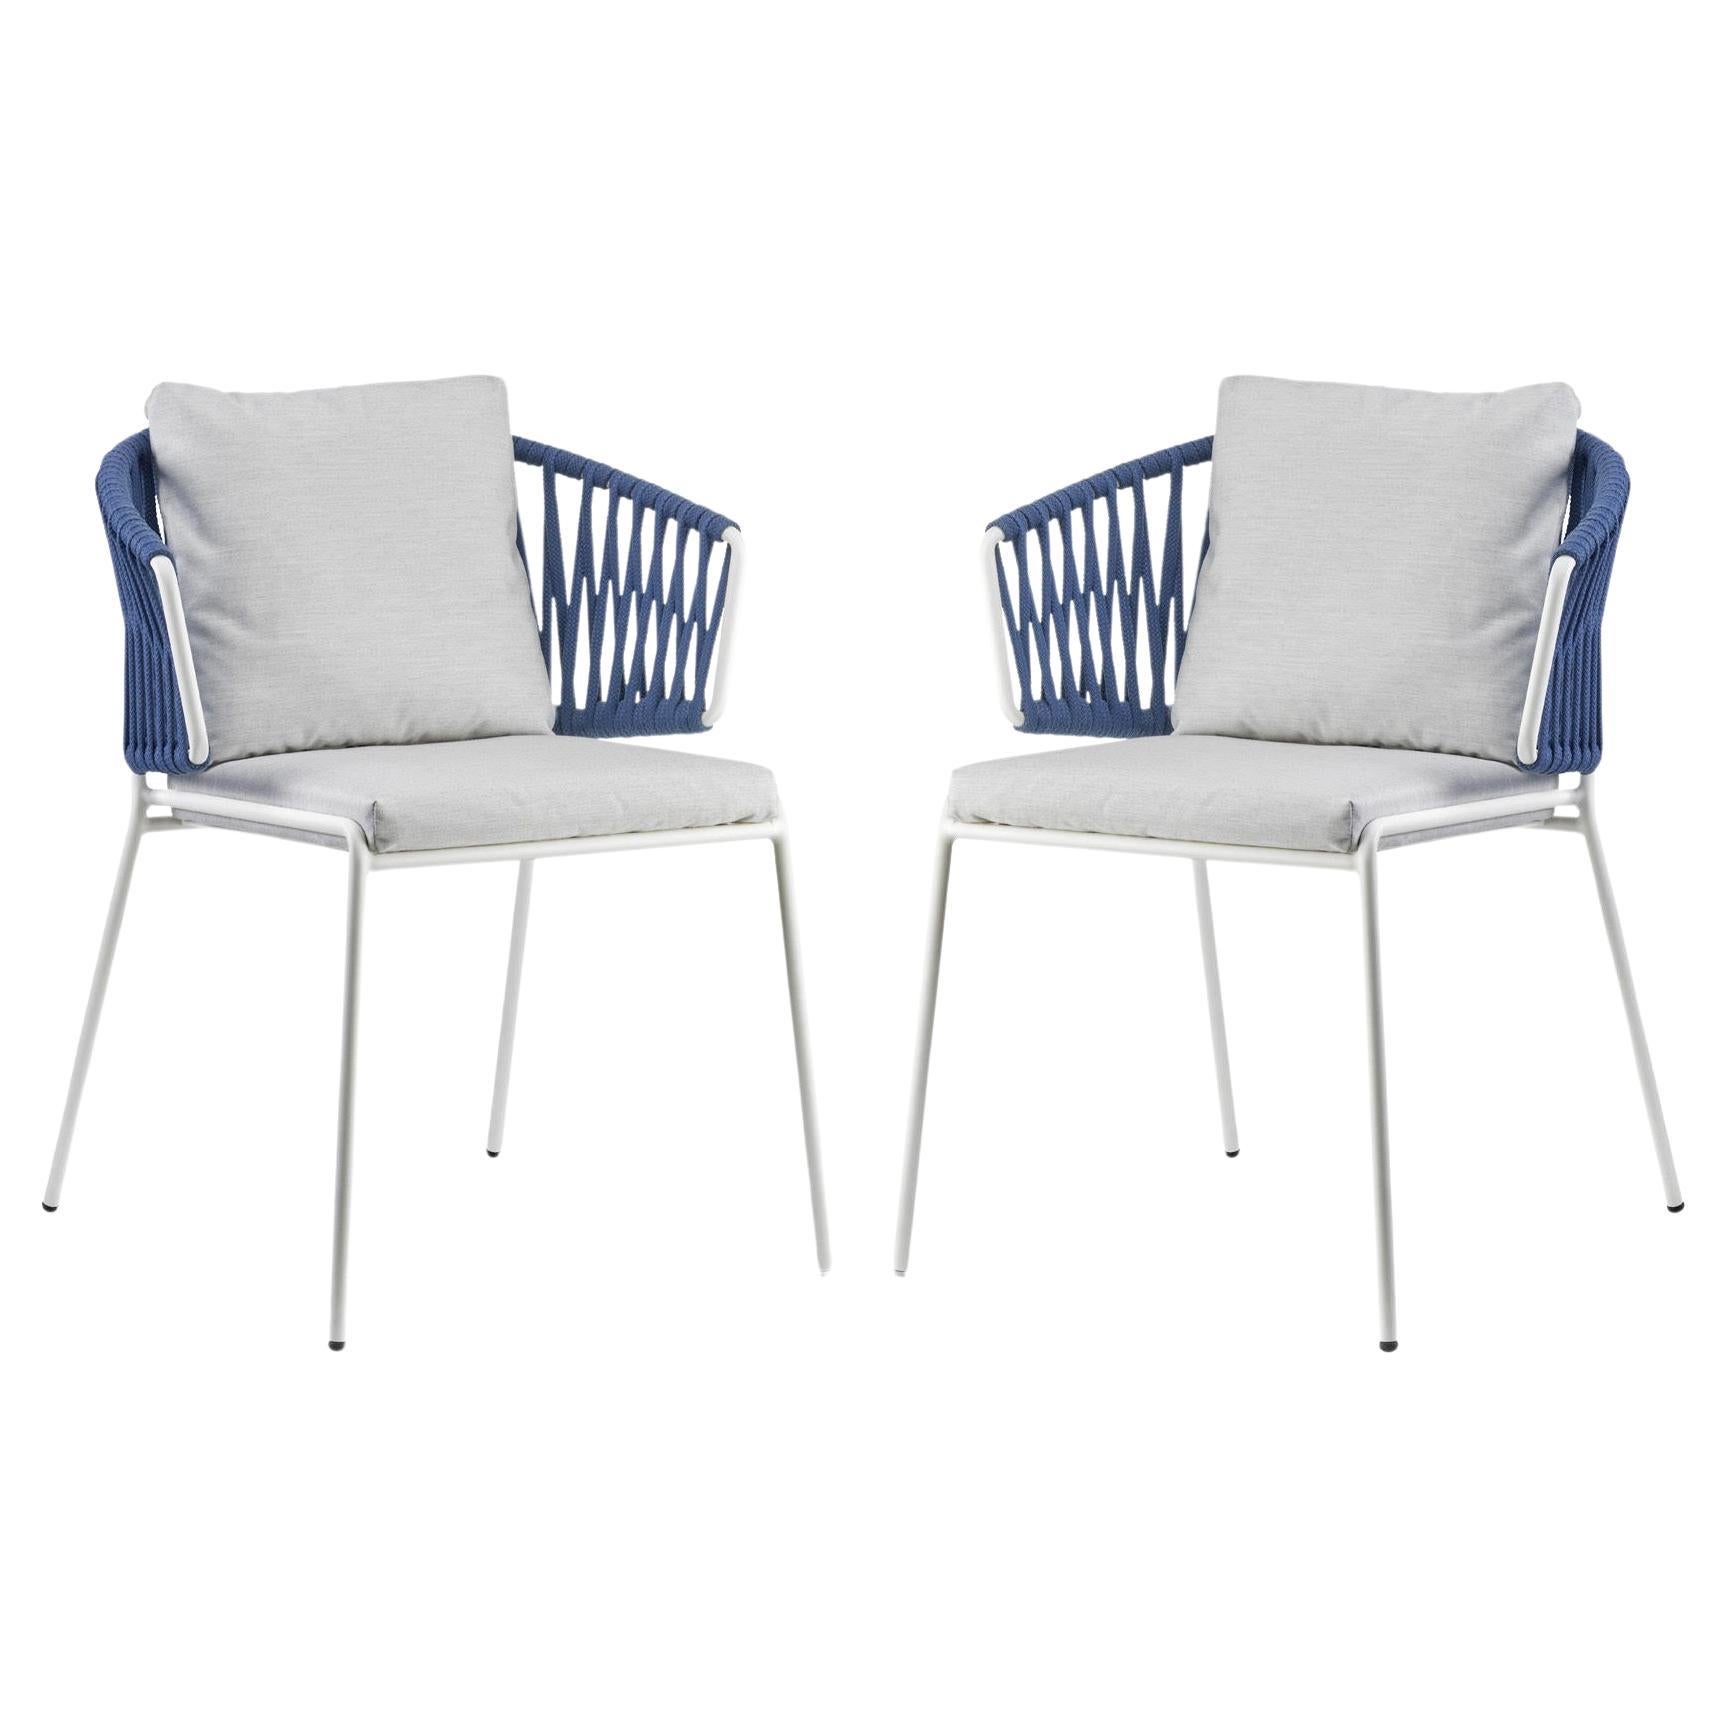 Pair of Blue Outdoor or Indoor Metal and Cord Armchairs, 21 century For Sale